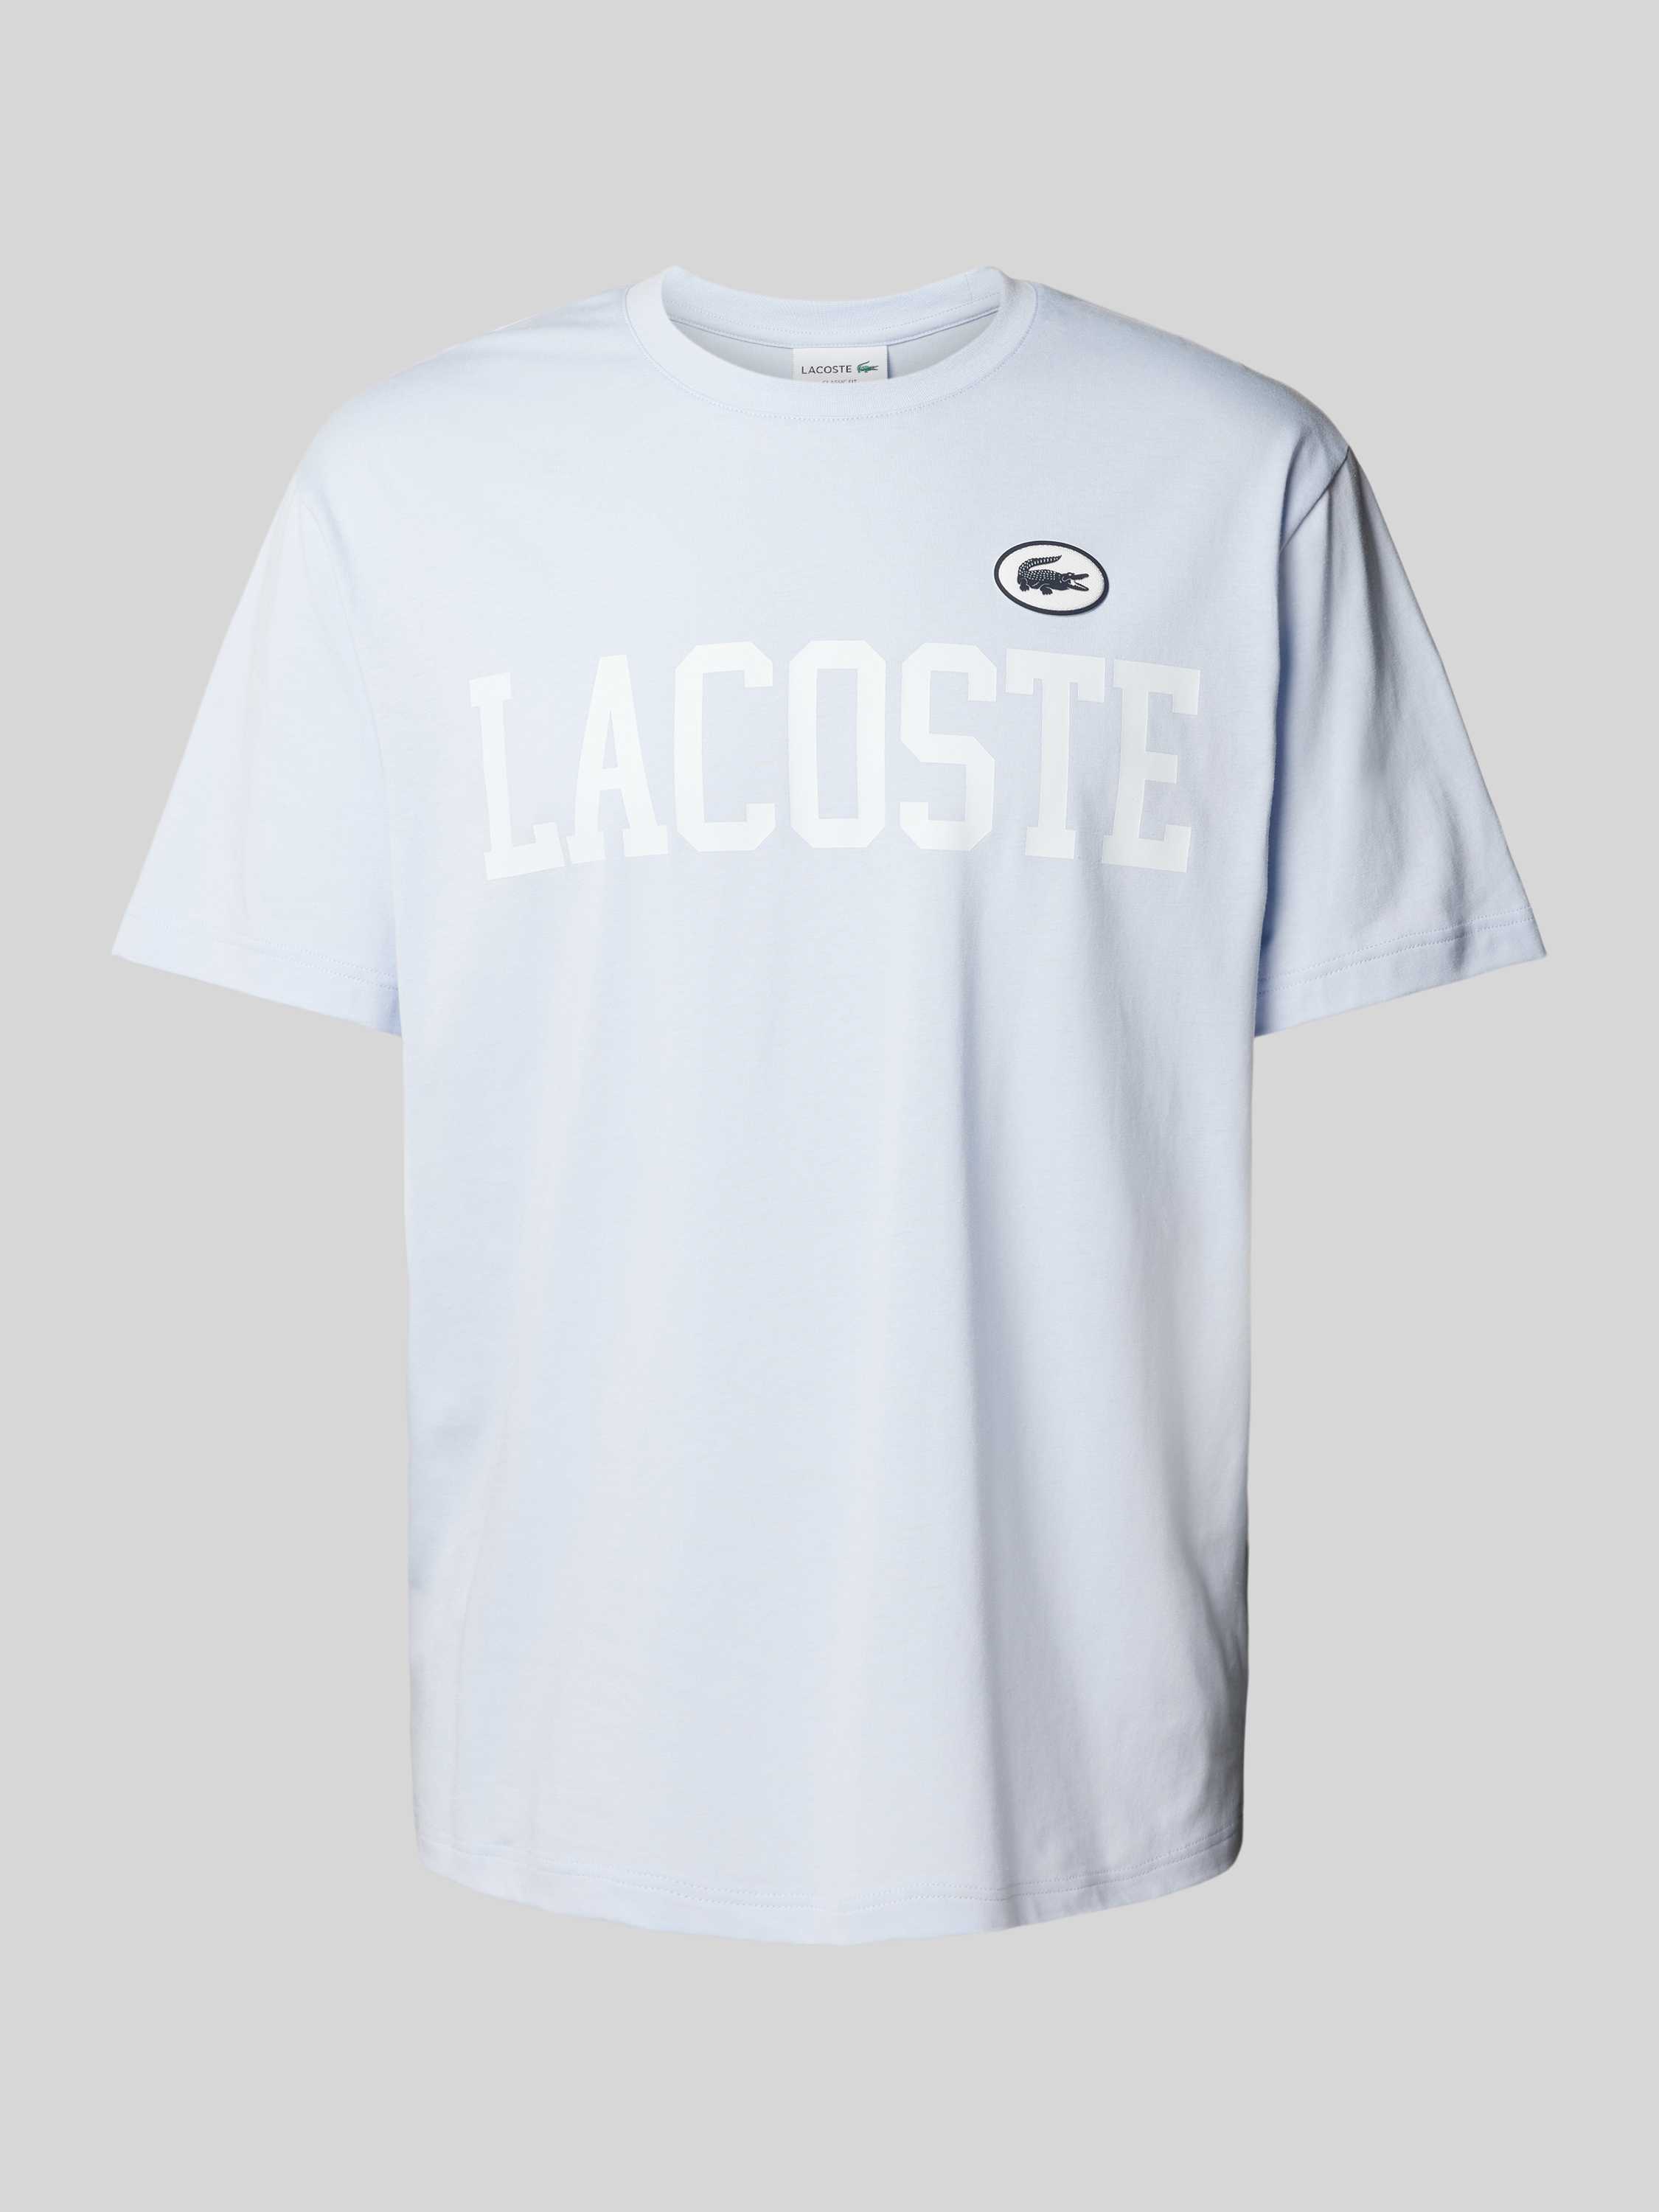 Lacoste T-shirt met labelbadge model 'FRENCH ICONICS'